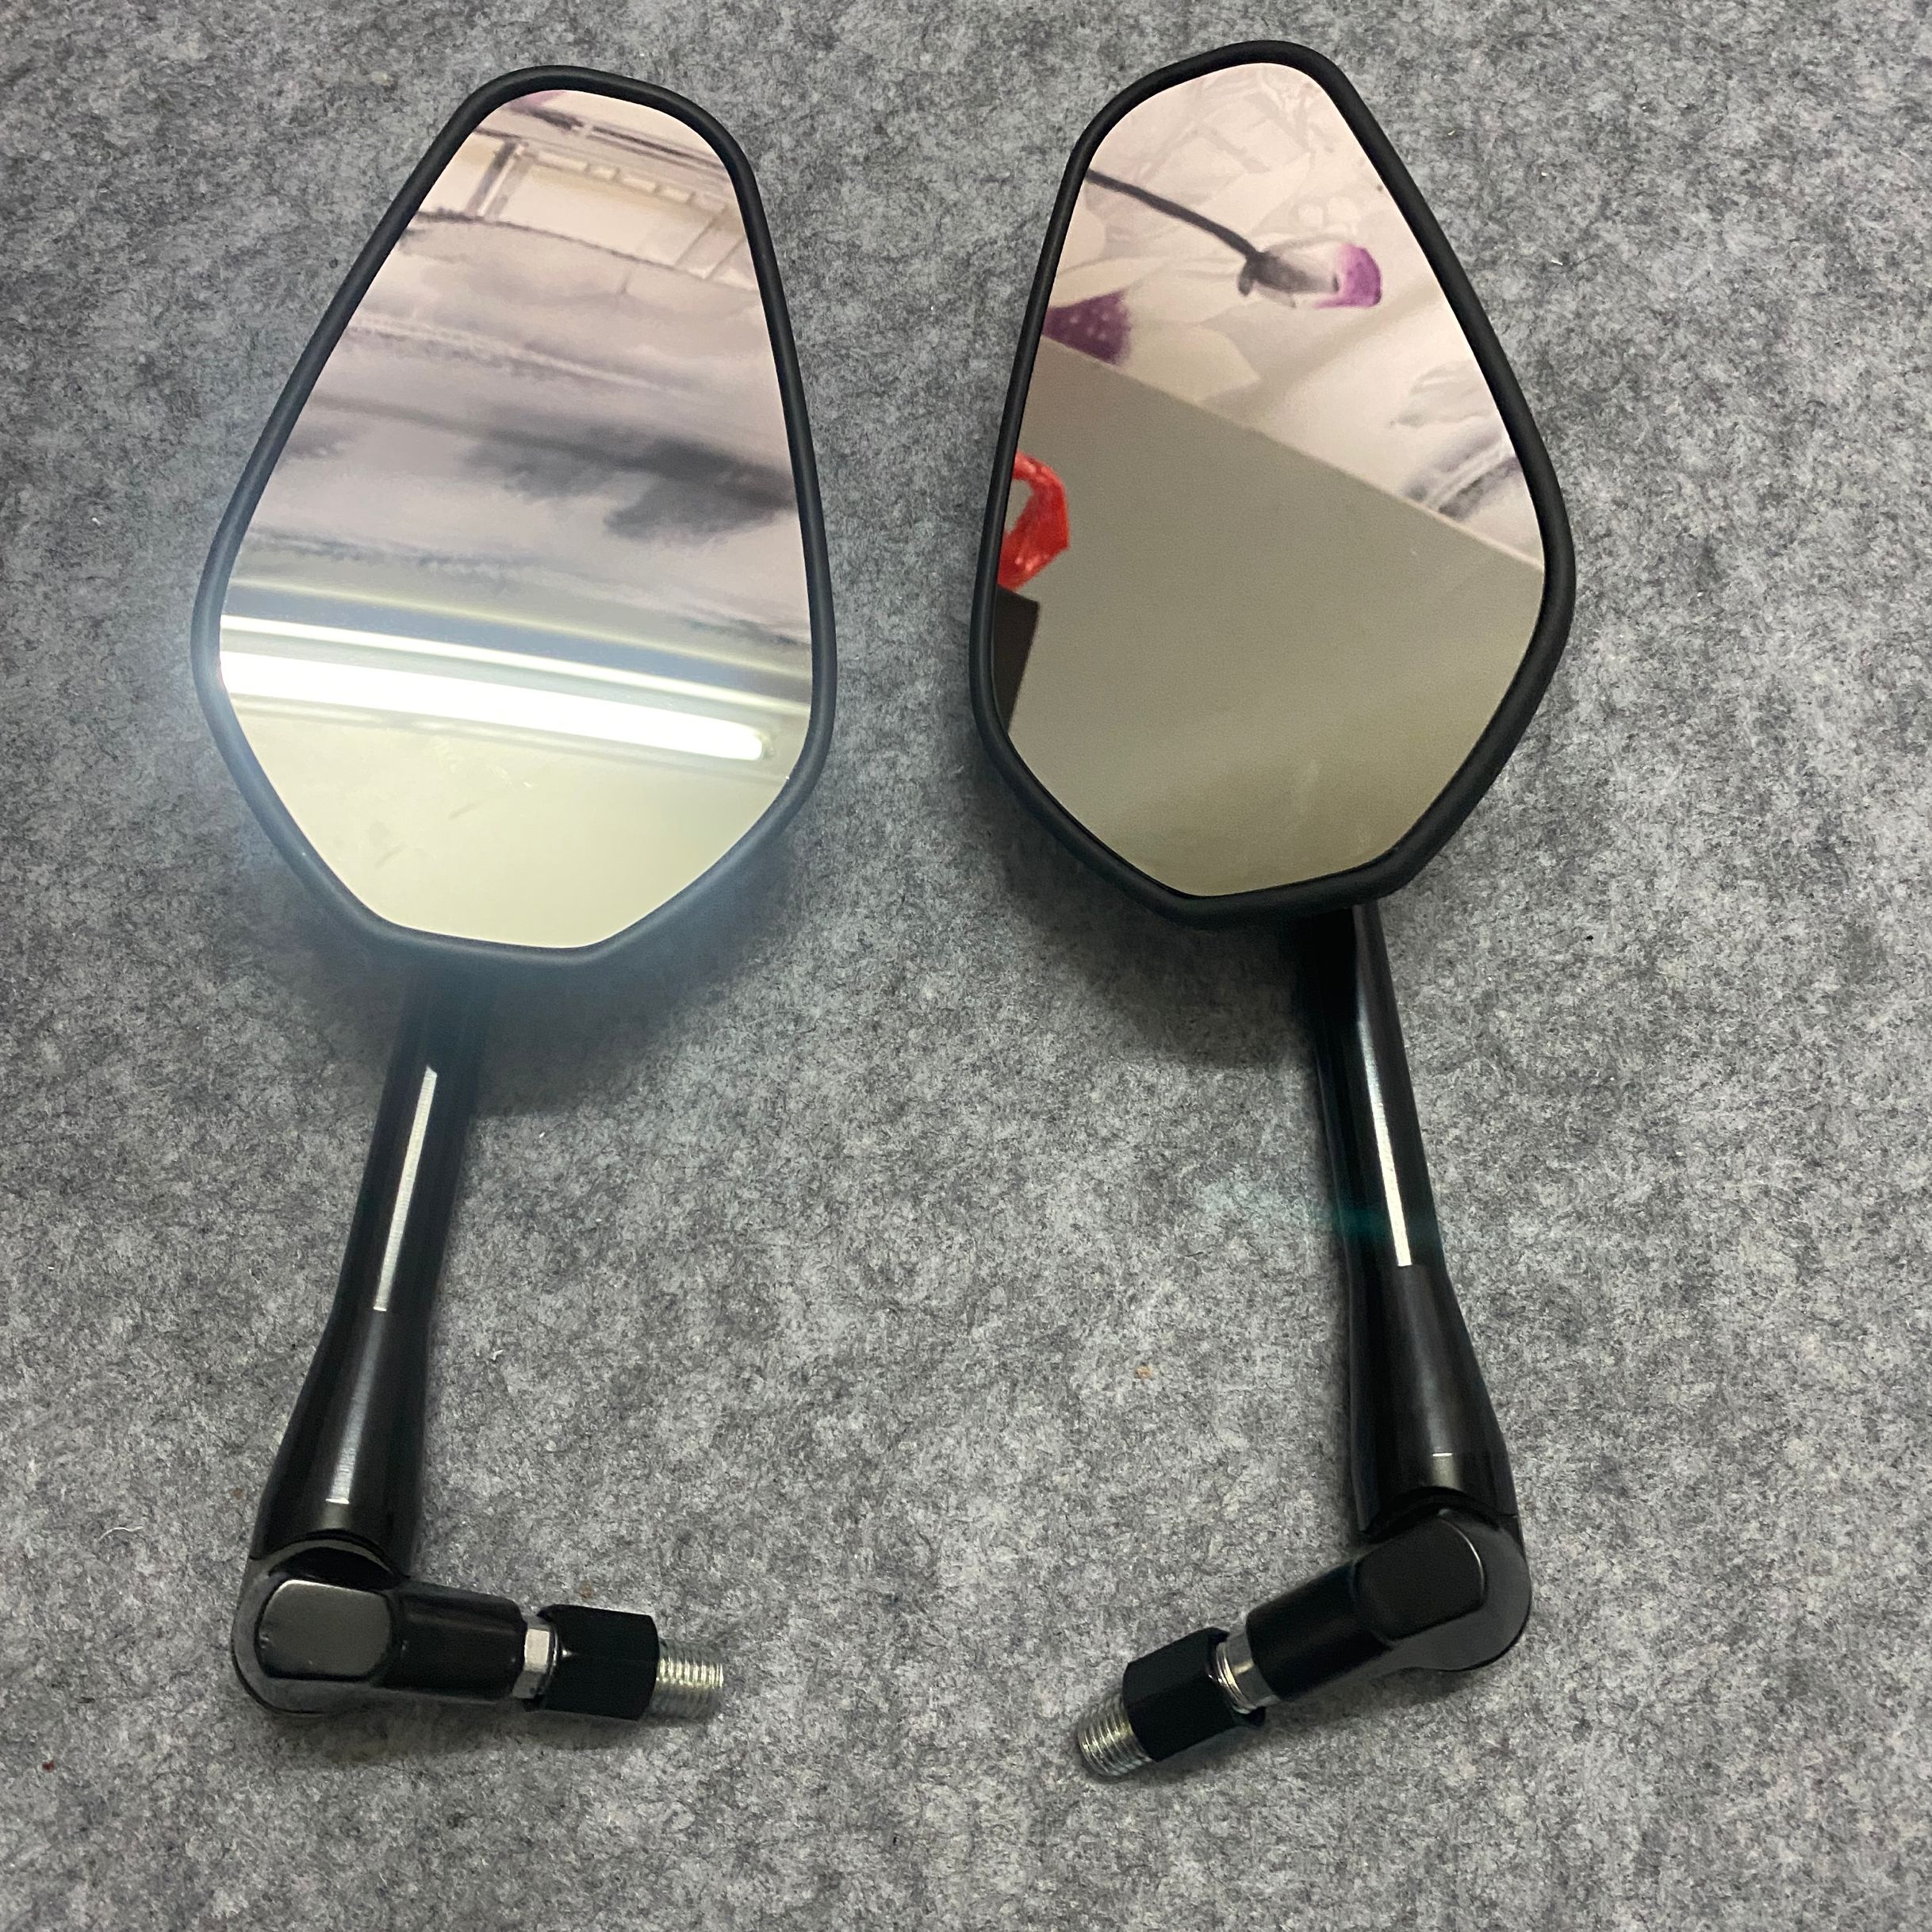 10mm Motorcycle Rearview Mirror Case for BMW R1200GS S1000XR S1000R G310 G310R G310GS G310F